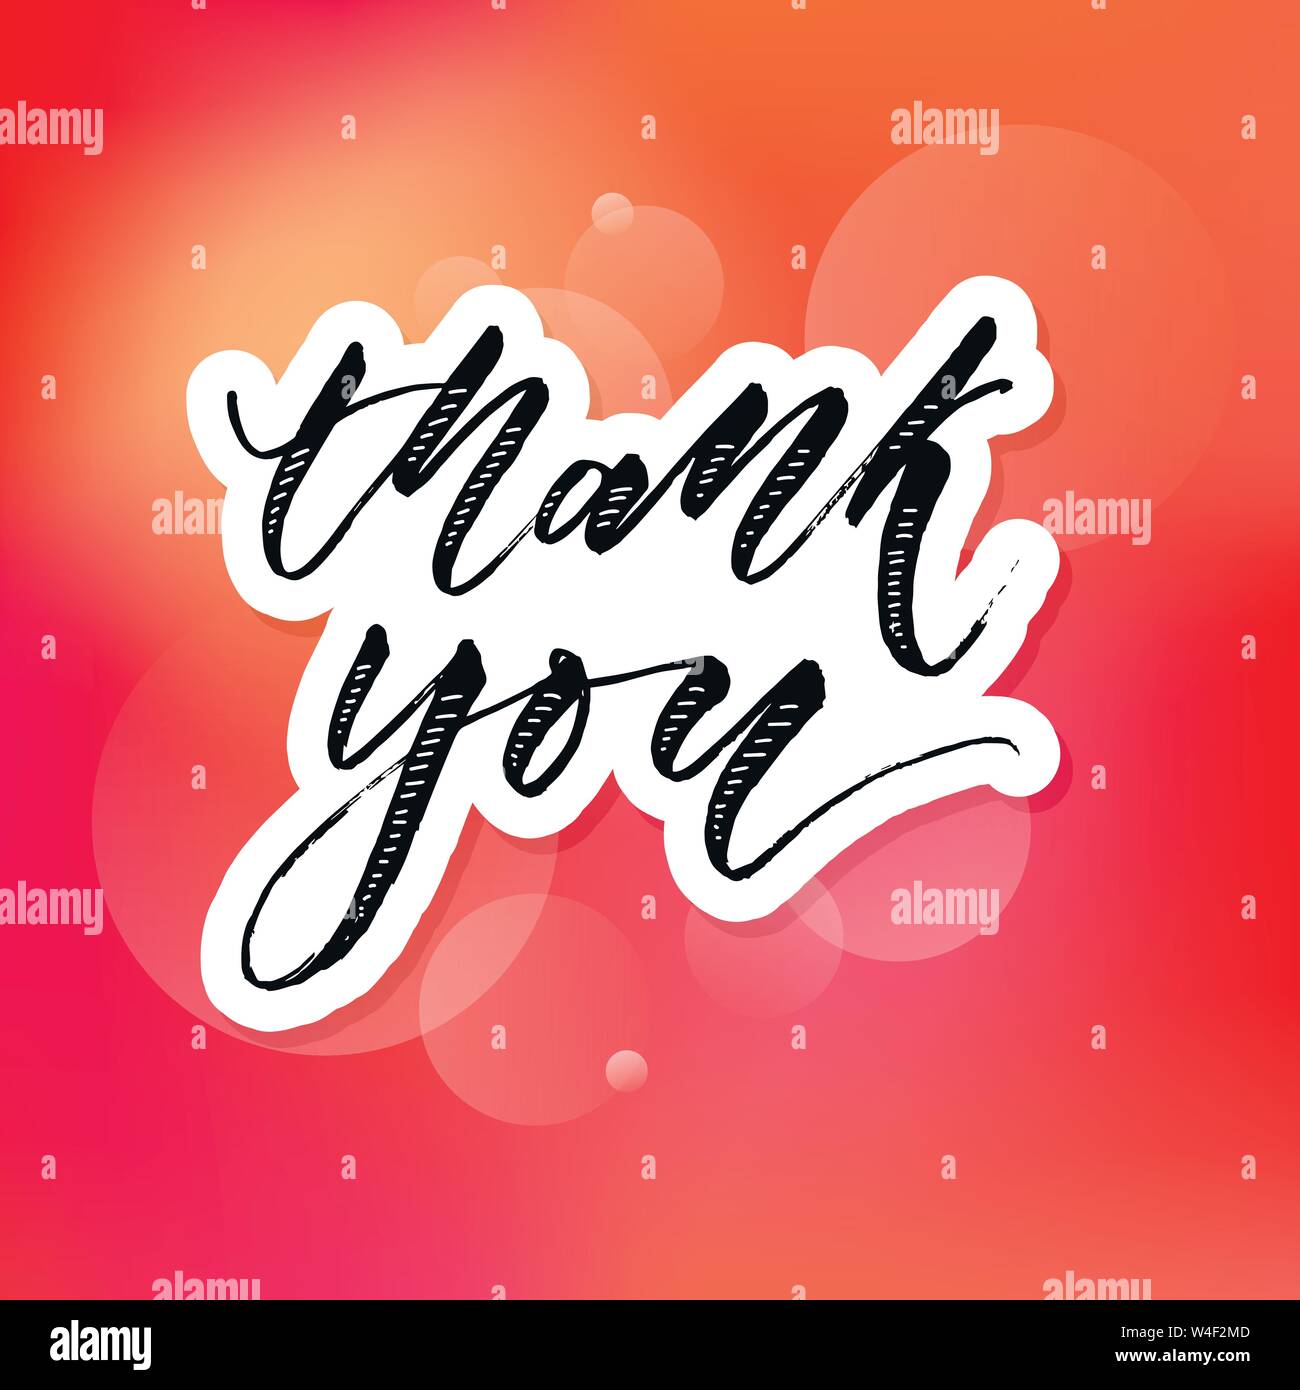 https://c8.alamy.com/comp/W4F2MD/thank-you-watercolor-lettering-calligraphy-vector-illustration-W4F2MD.jpg